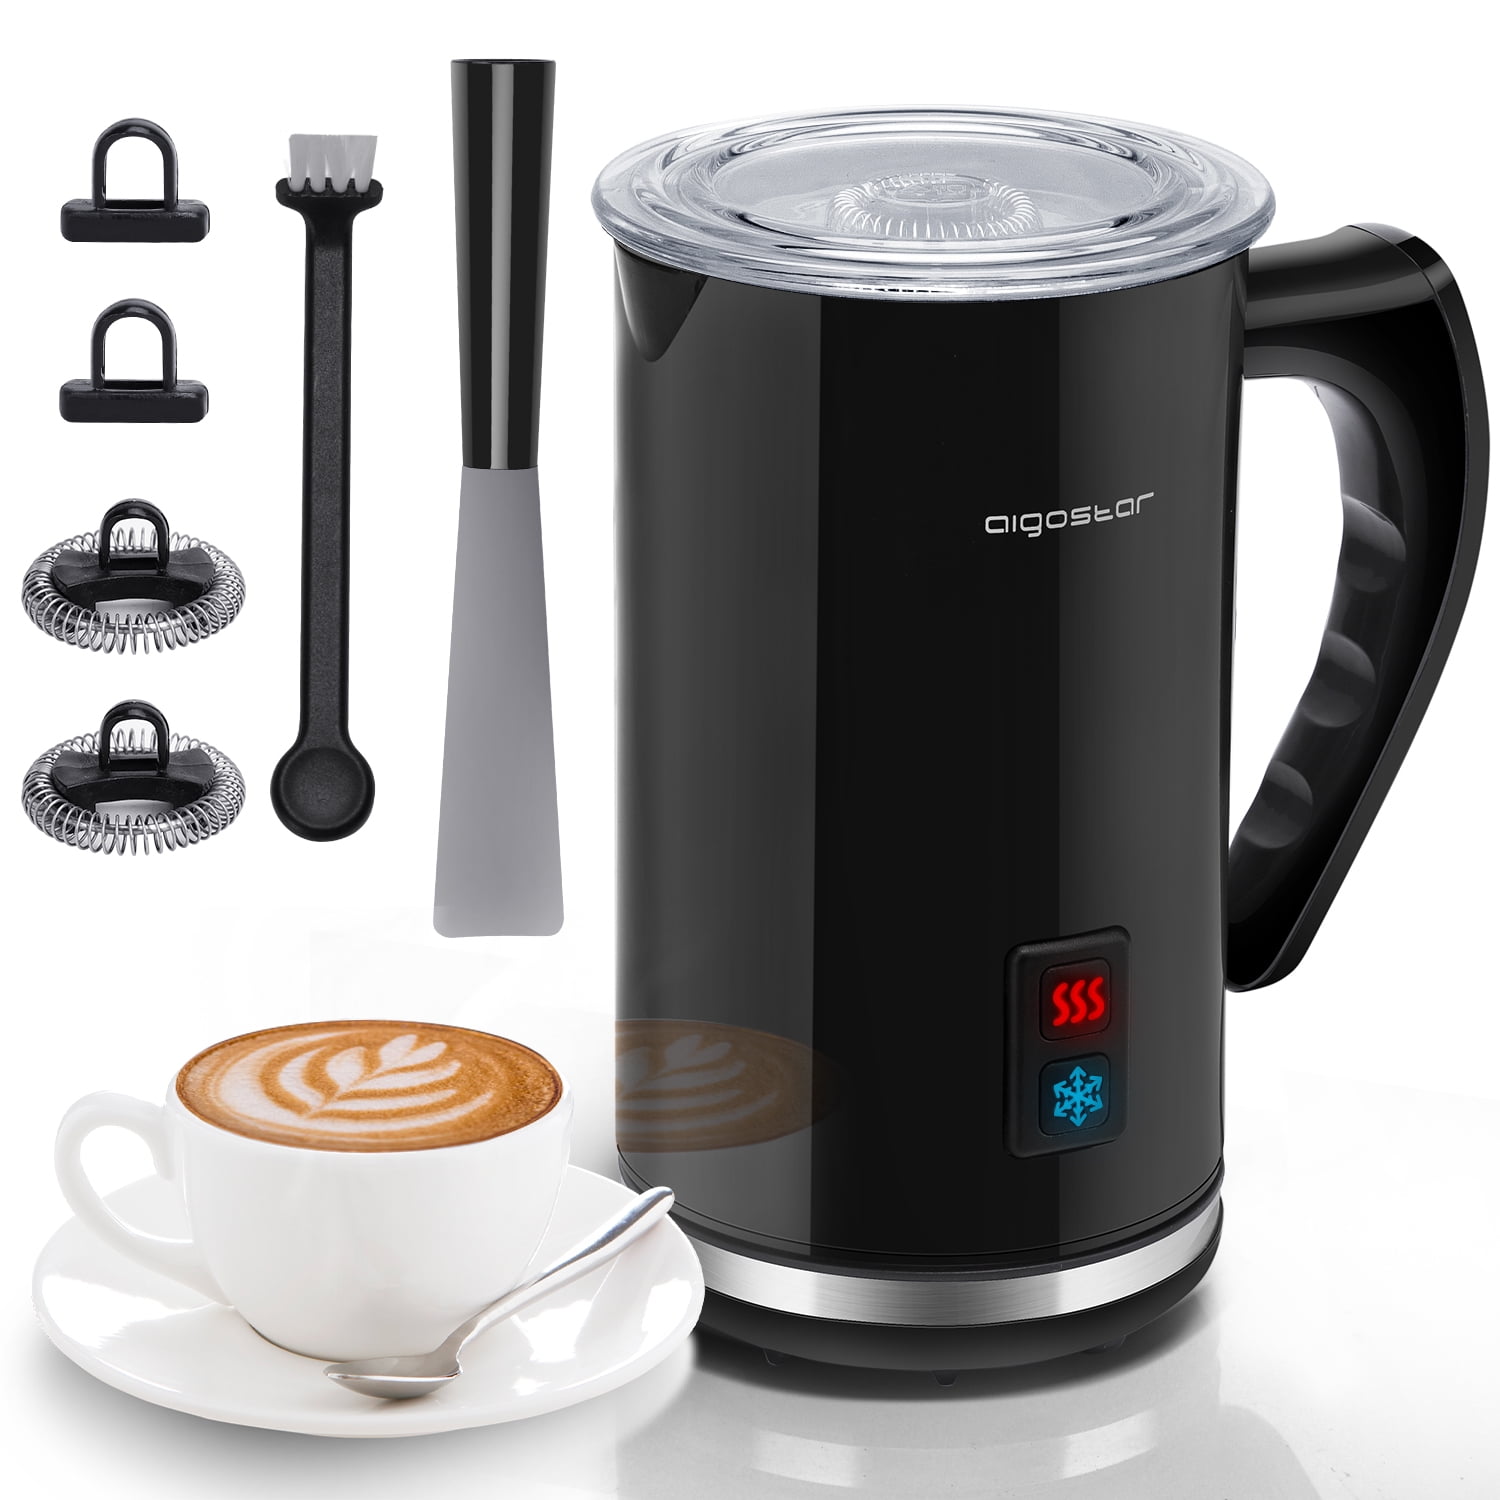  ARVOV Milk Frother, Automatic Milk Frother Machine, 4 in 1  Functions Milk Frother Machine for Coffee, Hot Chocolates, Latte,  Cappuccino, Milk Frother 240ml: Home & Kitchen